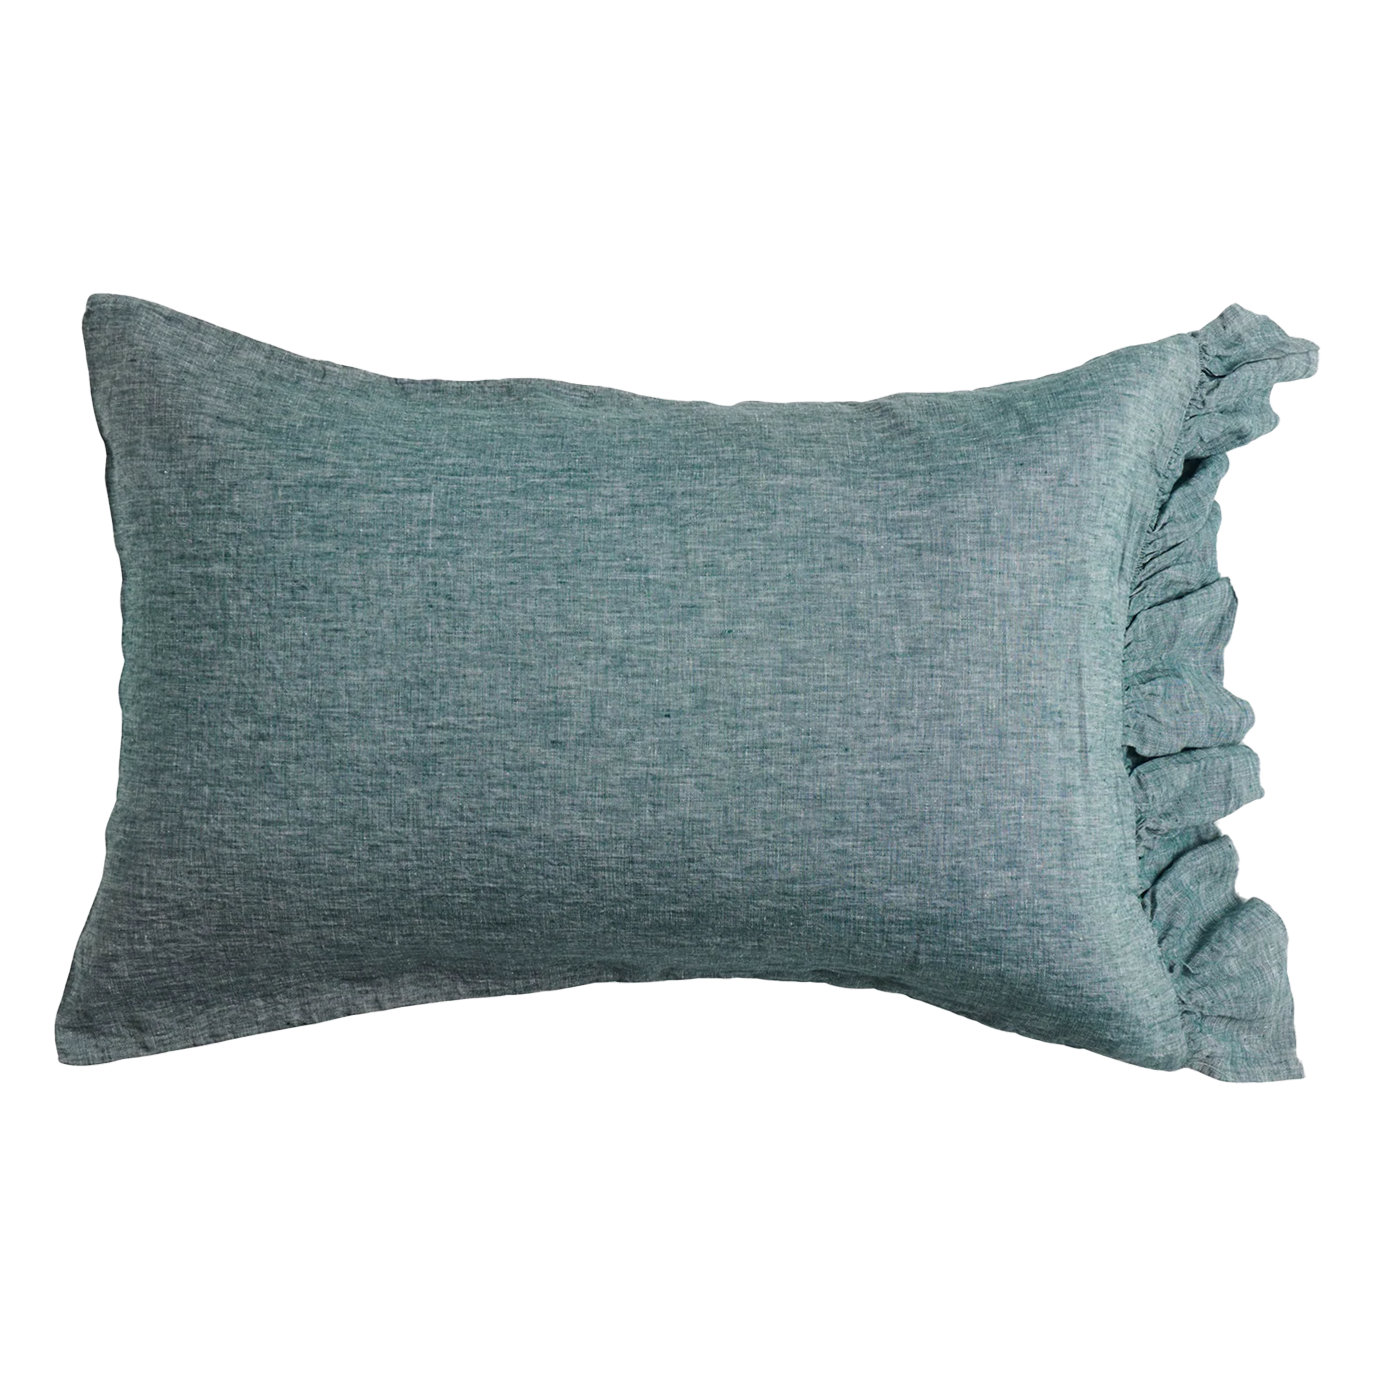 SOW spruce marl linen pillowcase set with ruffle